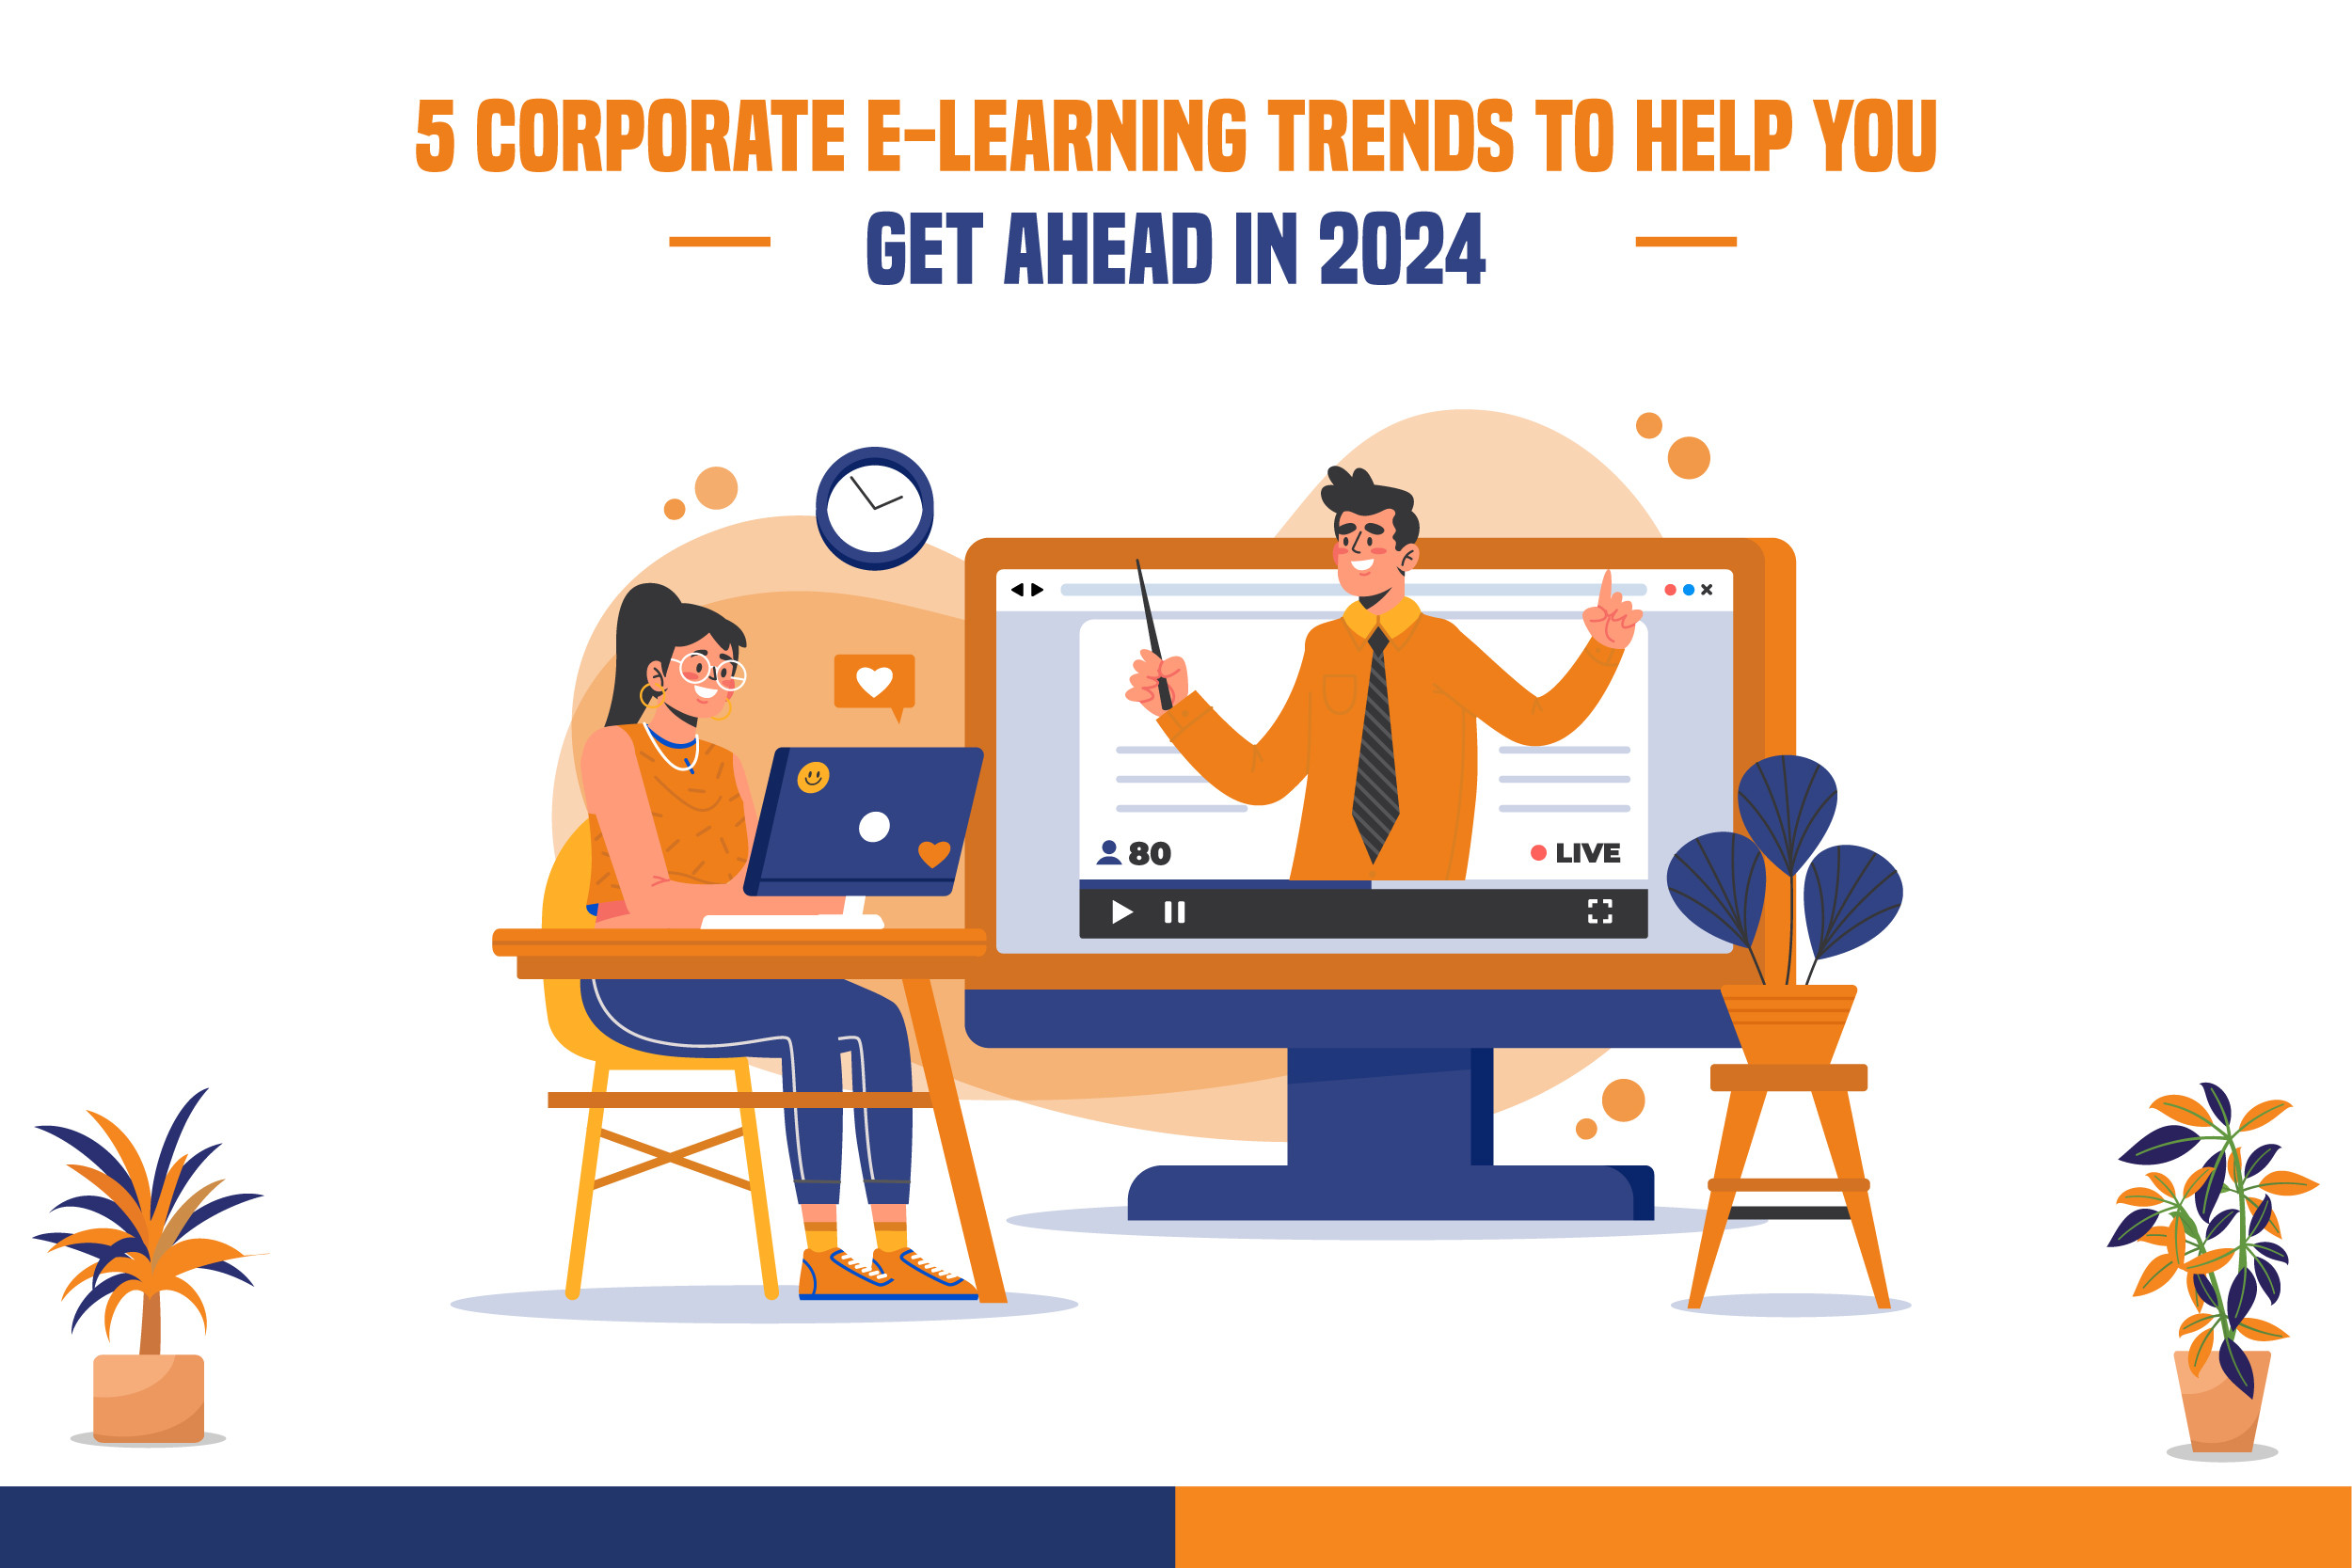 5 Corporate E-Learning Trends To Help You Get Ahead In 2024